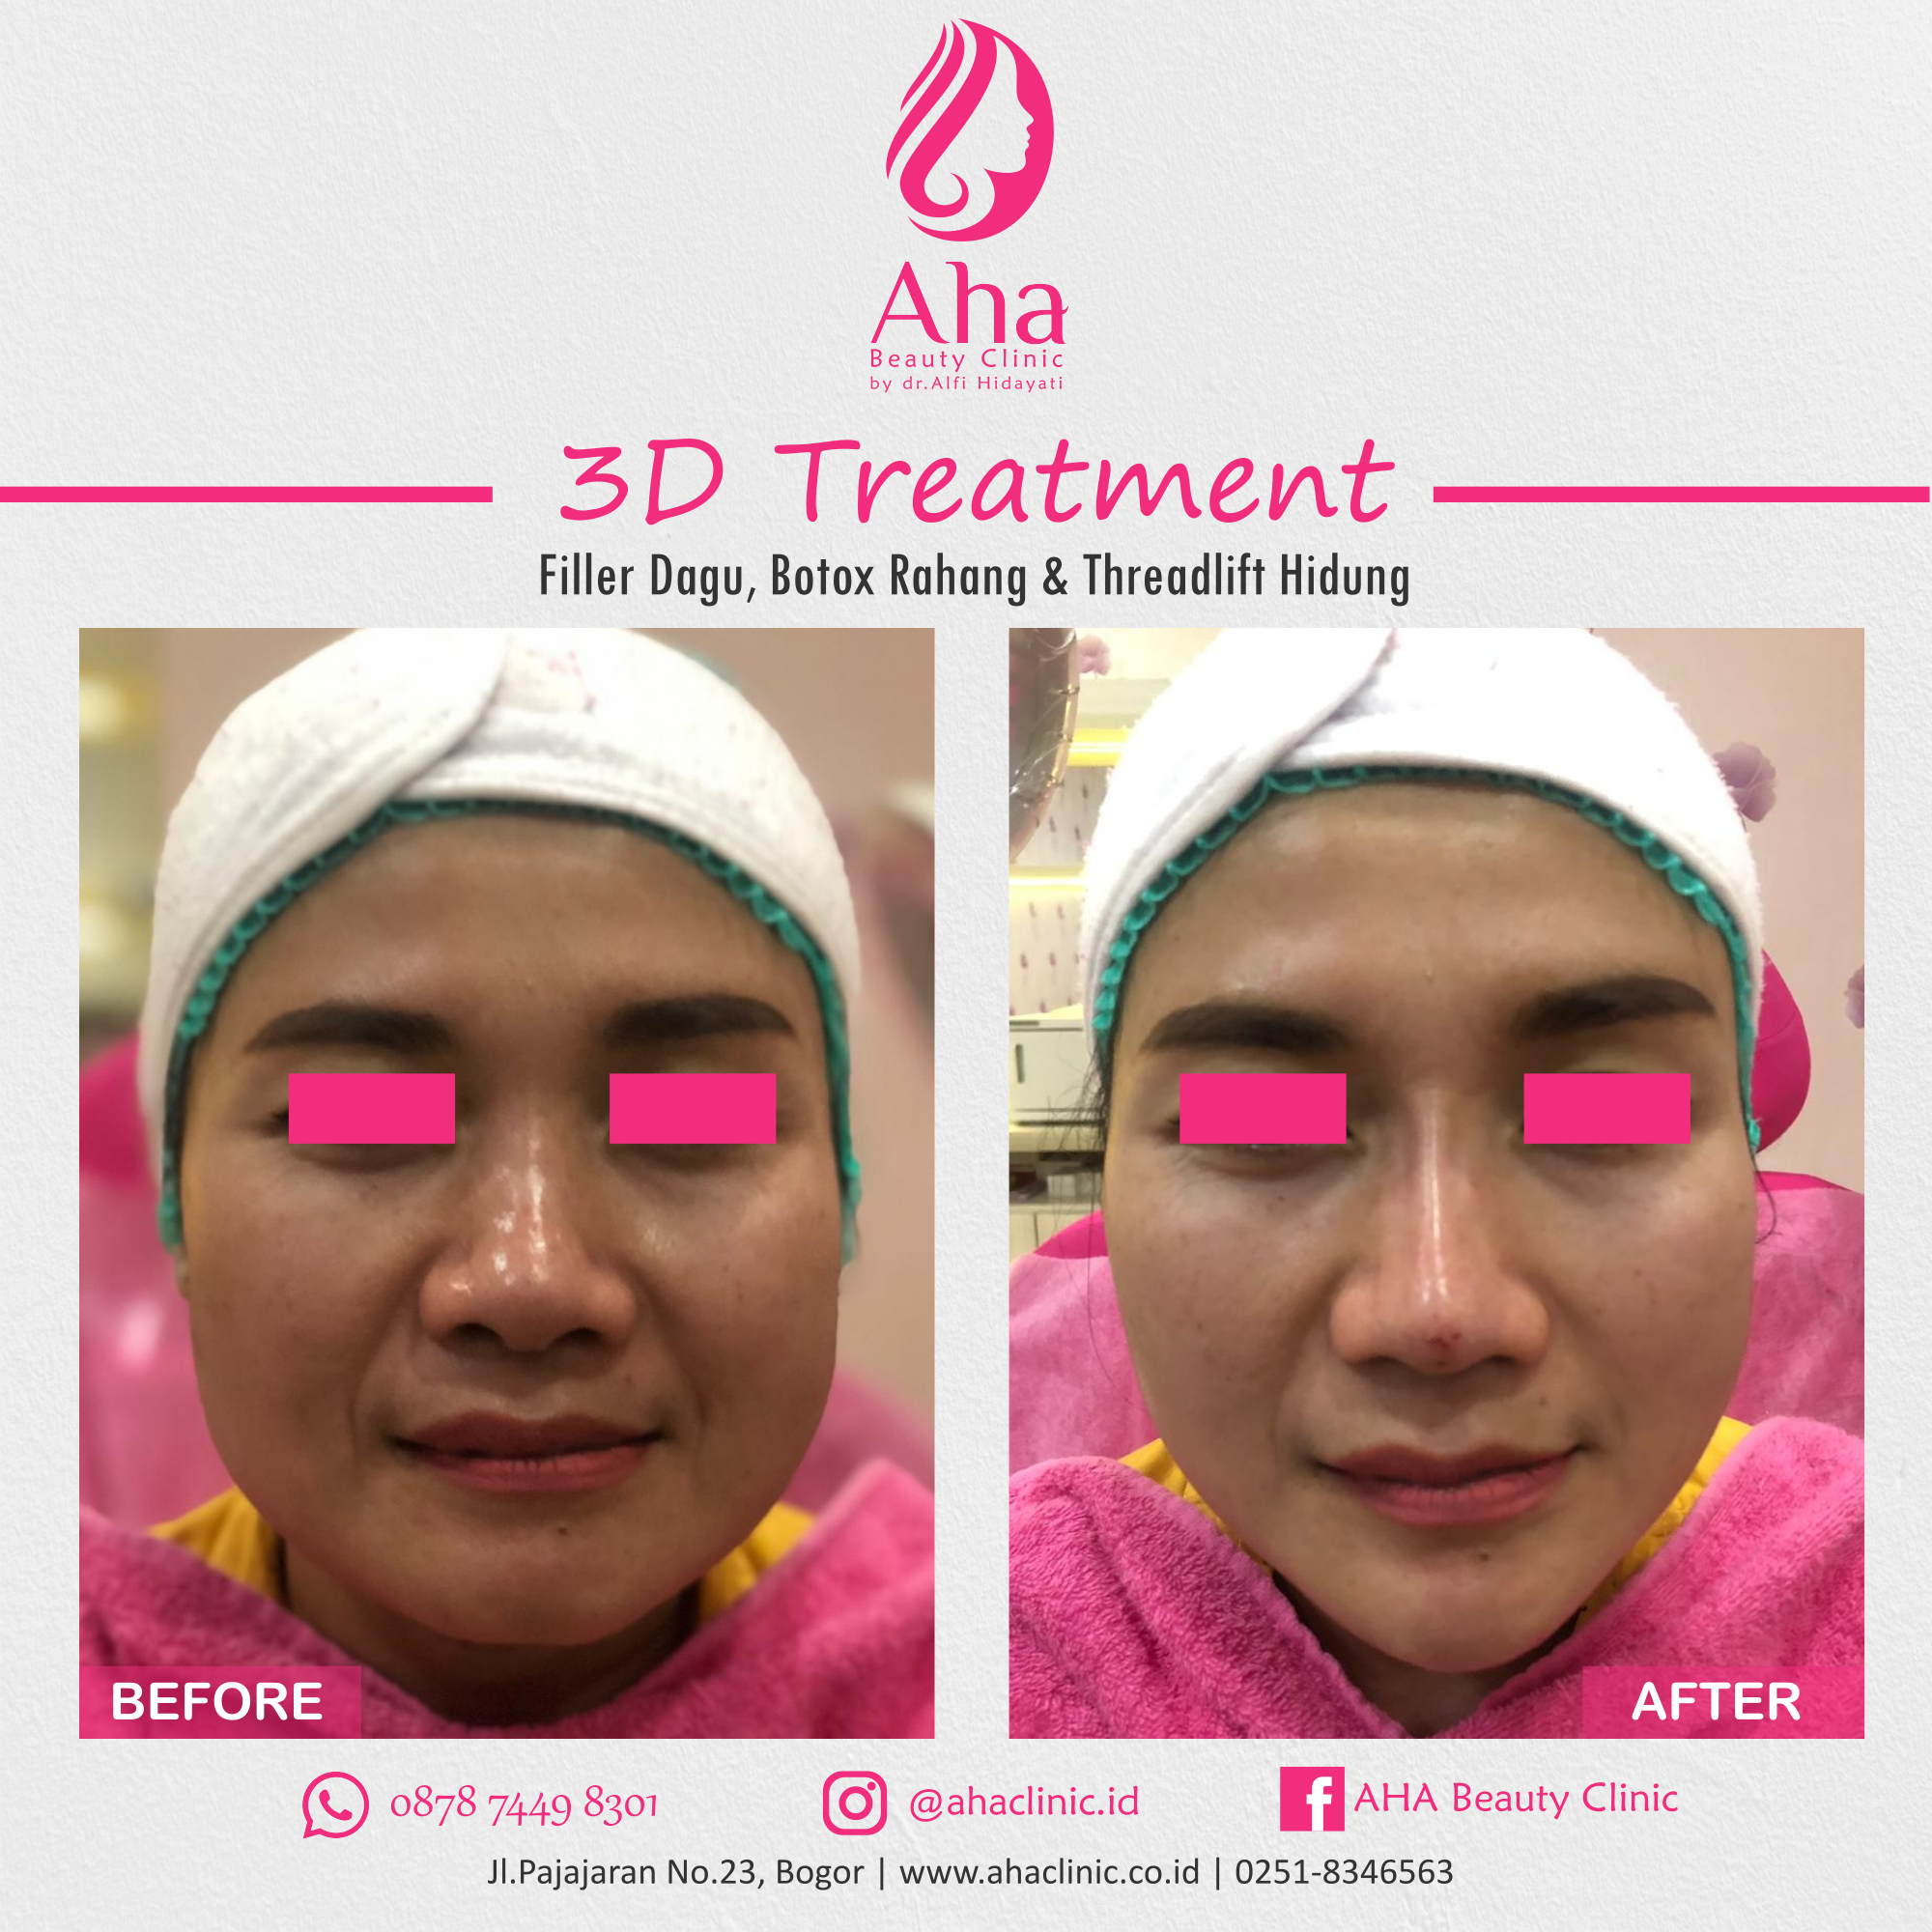 BEFORE AFTER 3D TREATMENT